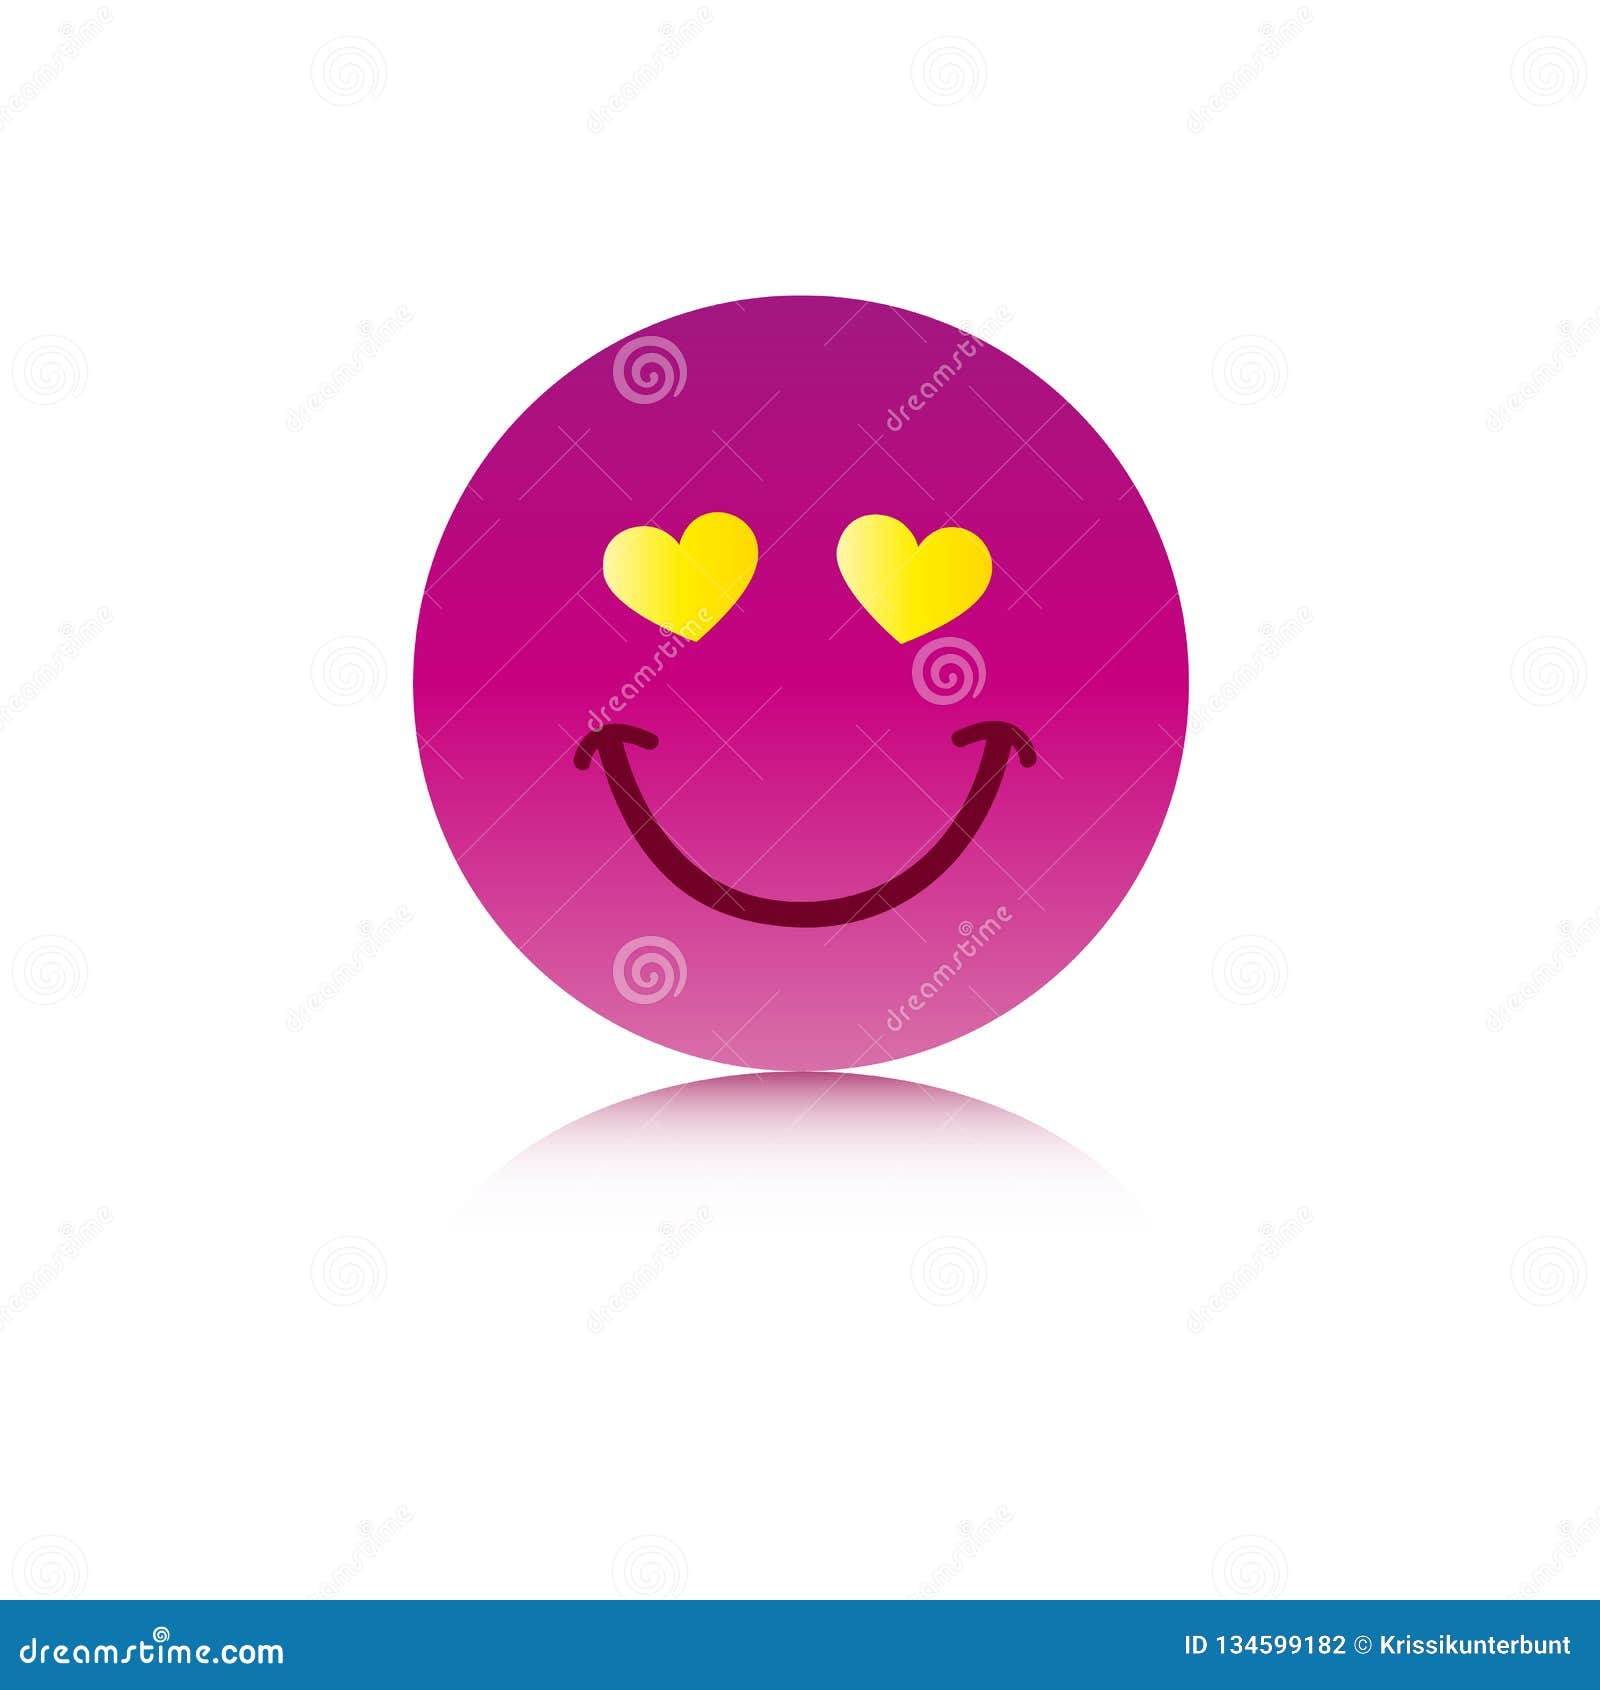 Happy Pink Emoji Face With Hearts As Eyes On White Background Stock